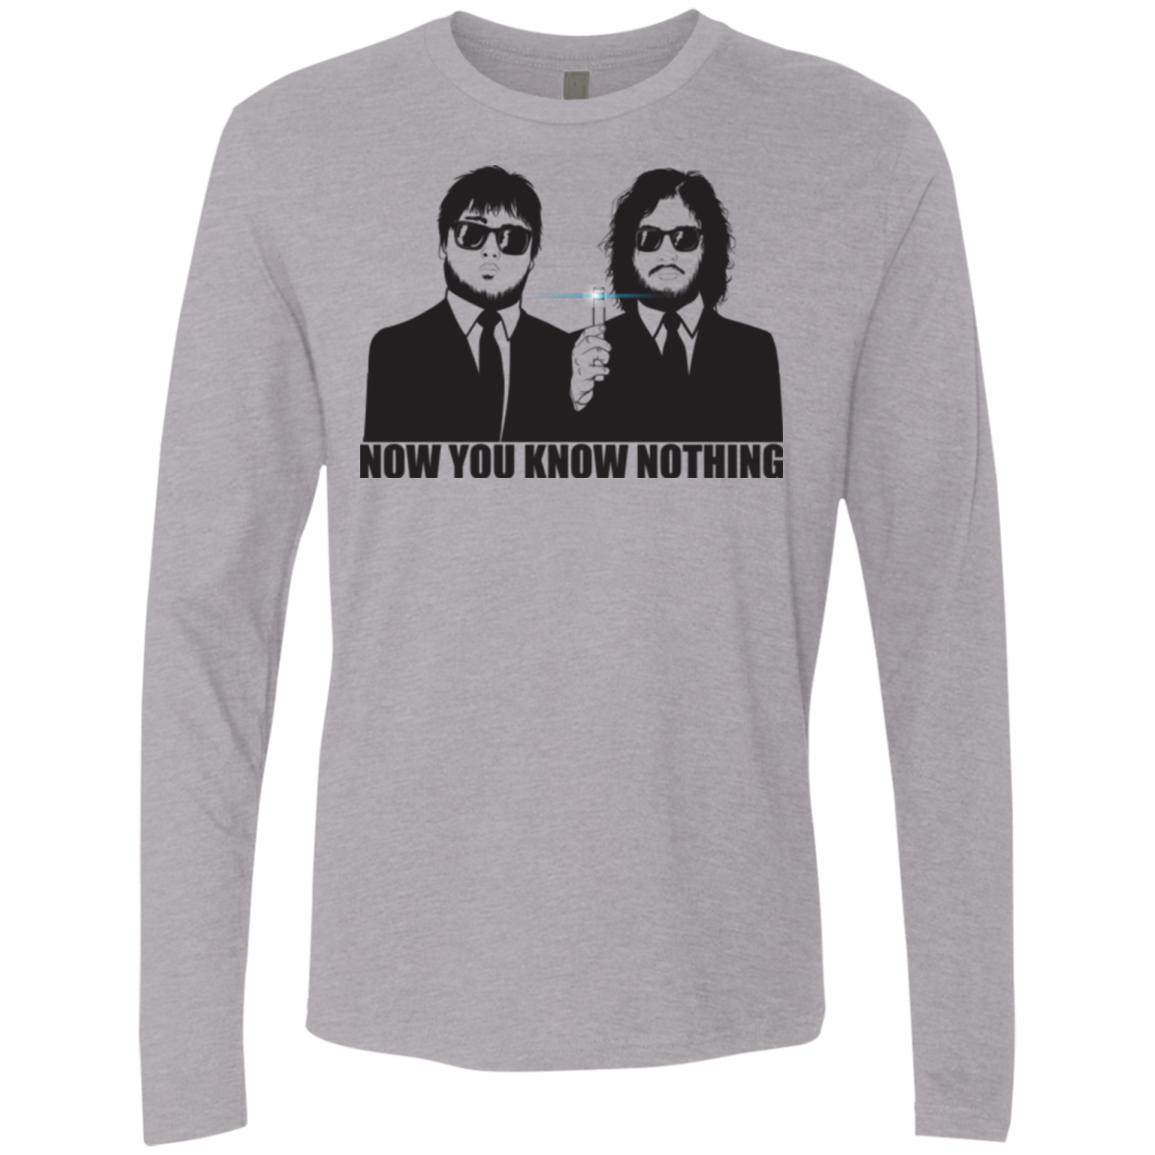 NOW YOU KNOW NOTHING Men's Premium Long Sleeve